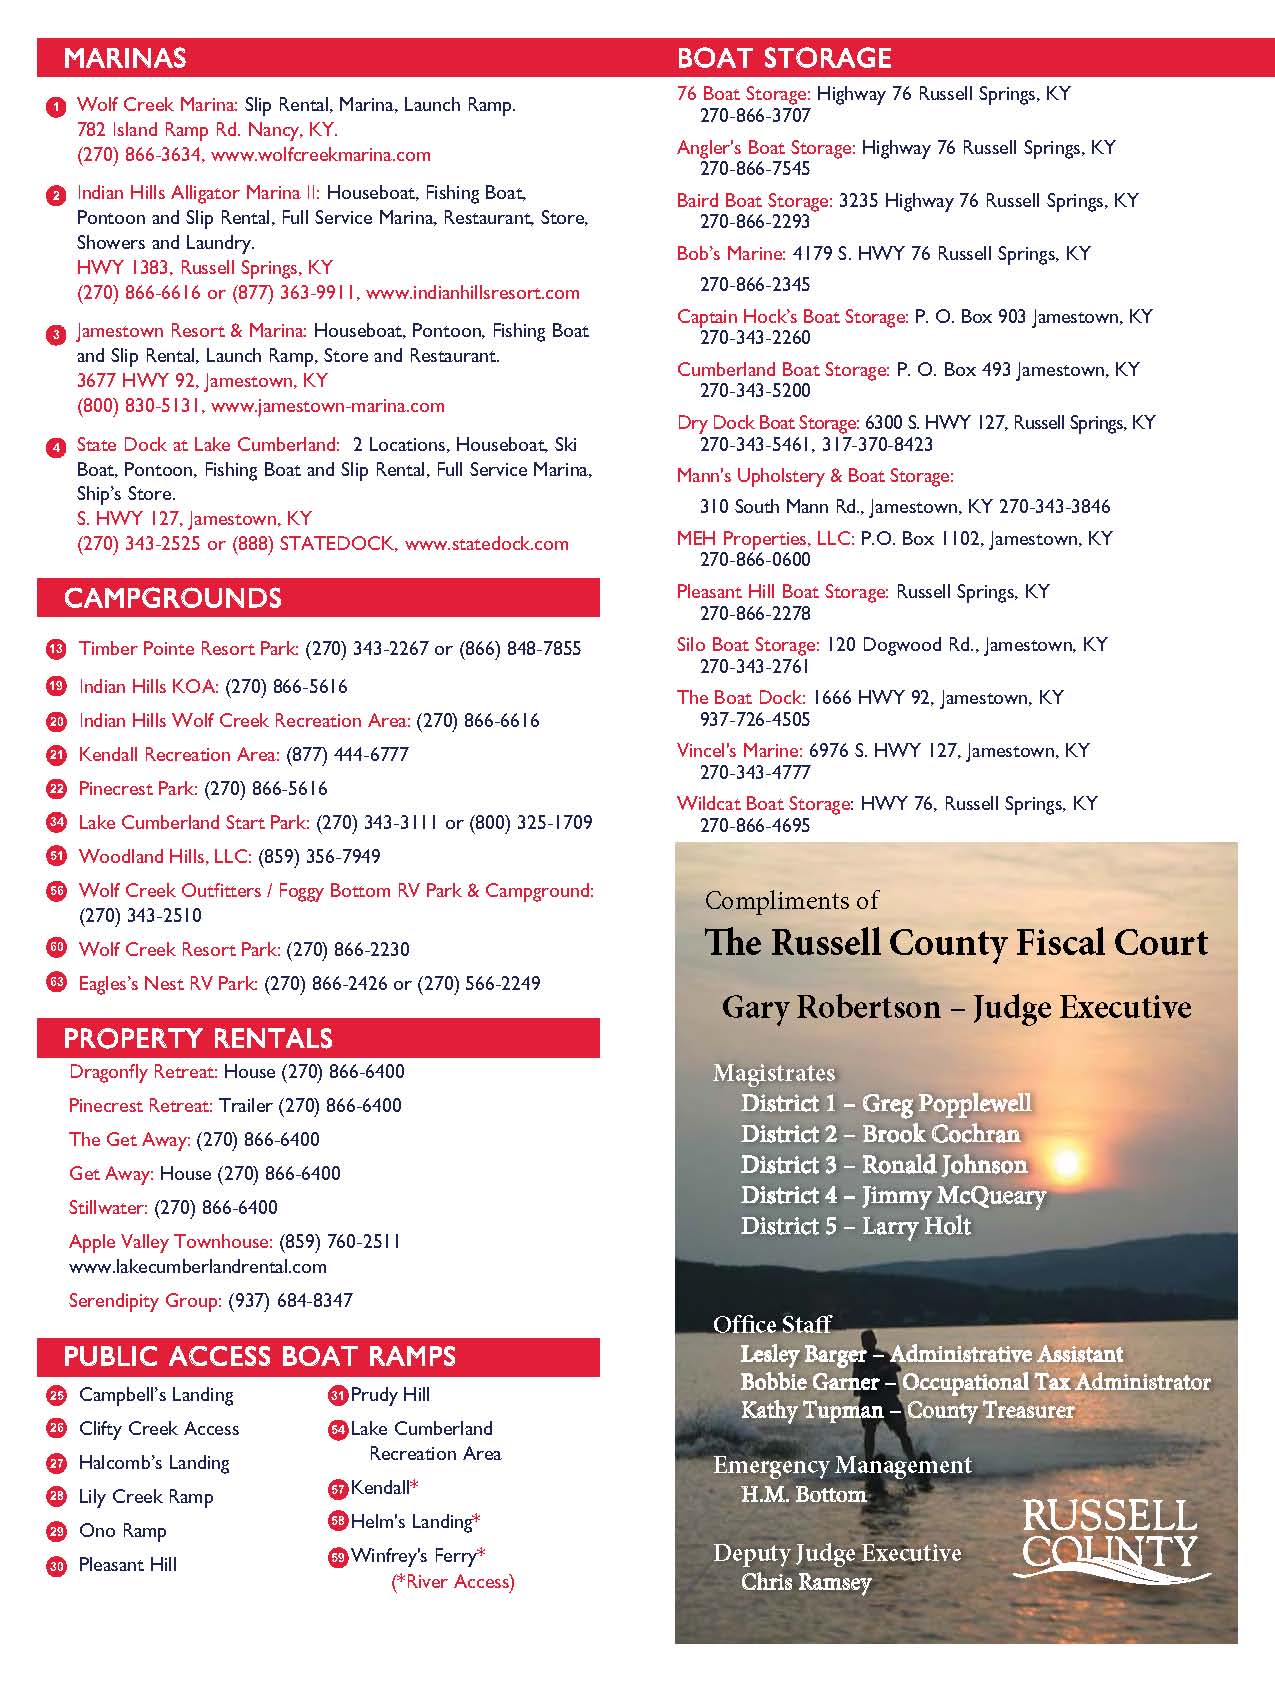 visitor-guide2013-web_Page_18.jpg